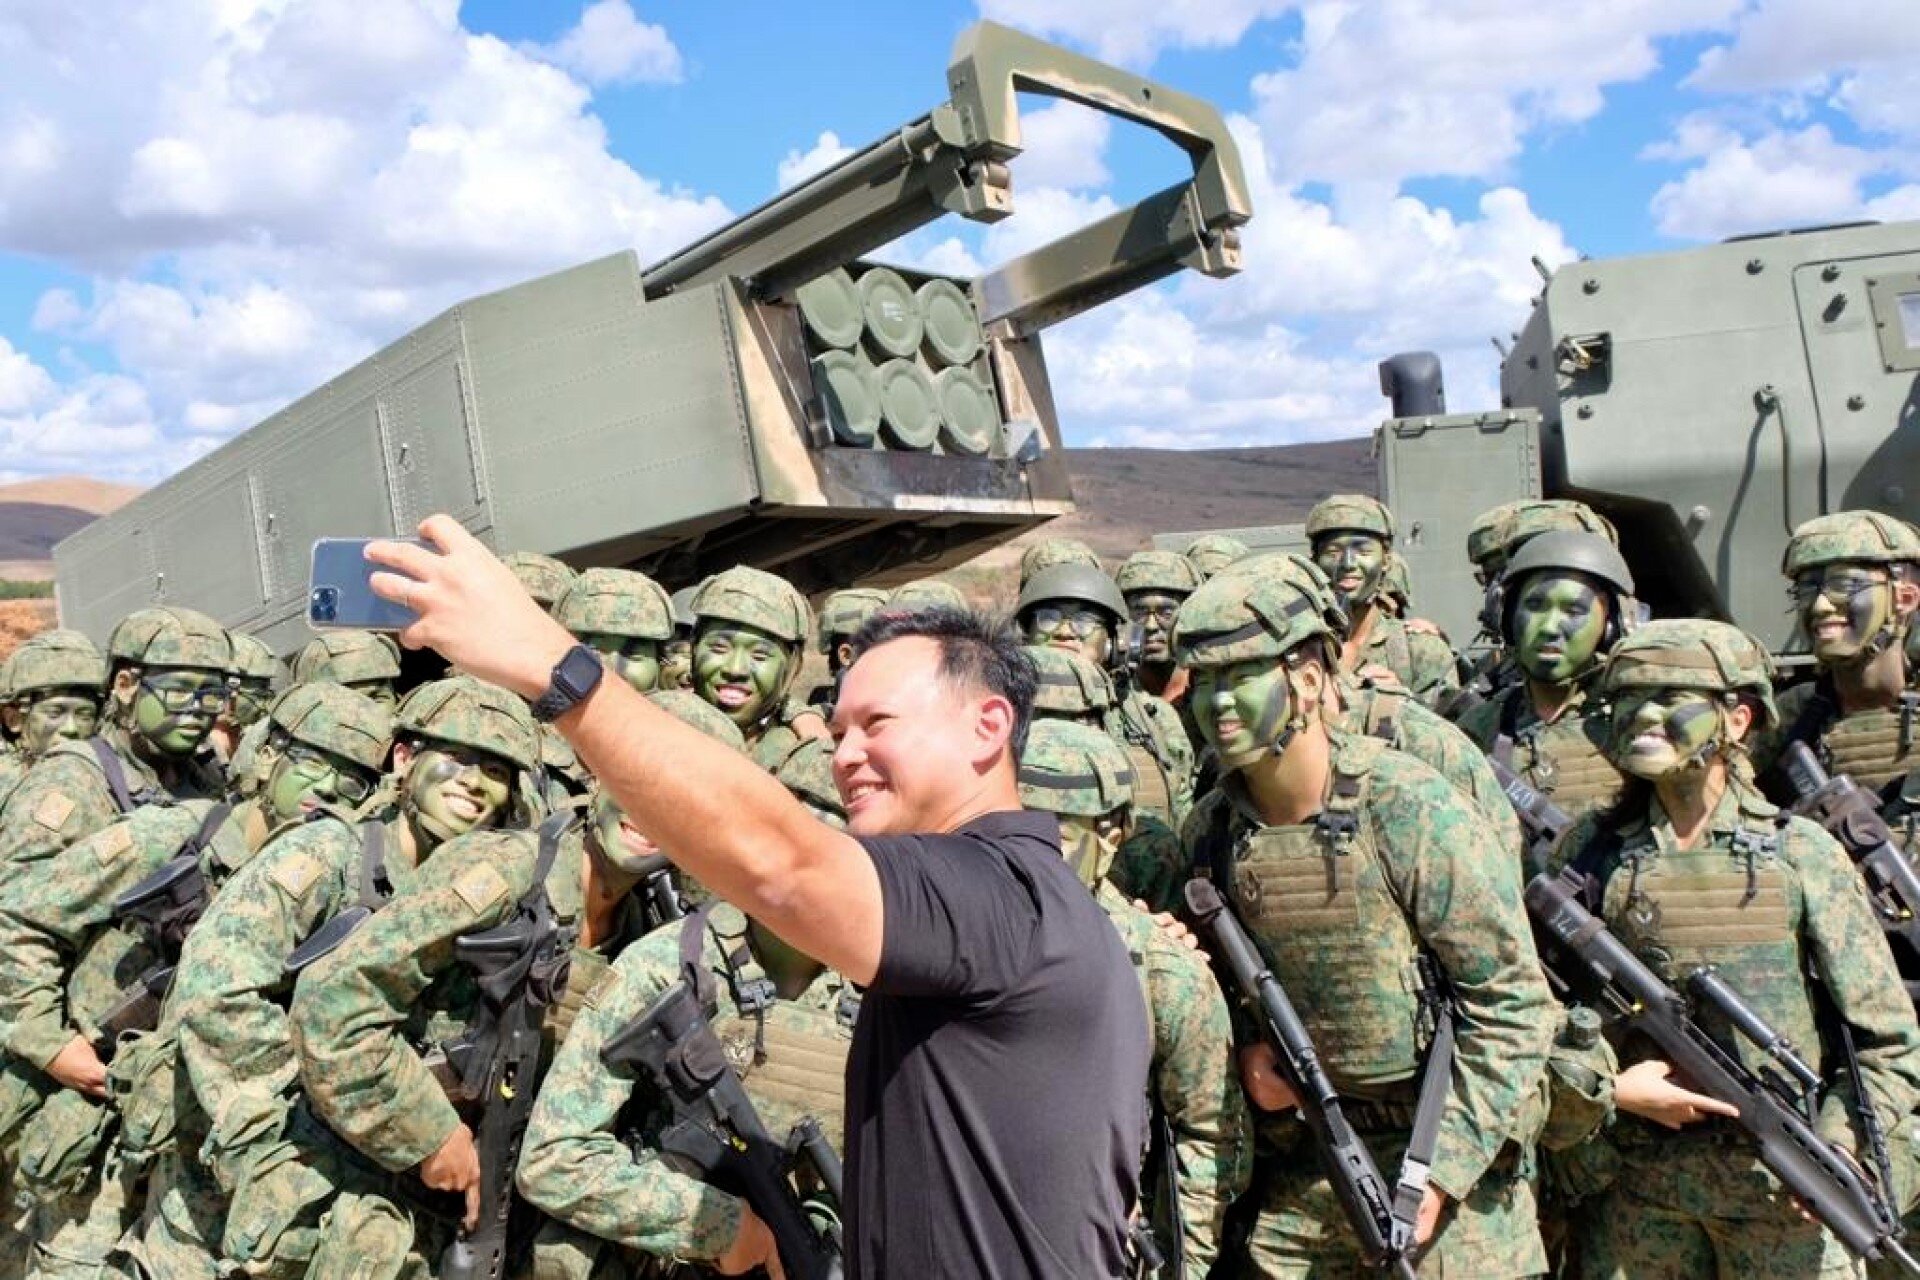 Mr Zaqy taking a group photo with soldiers from 23rd Battalion, Singapore Artillery after the live-firing exercise.